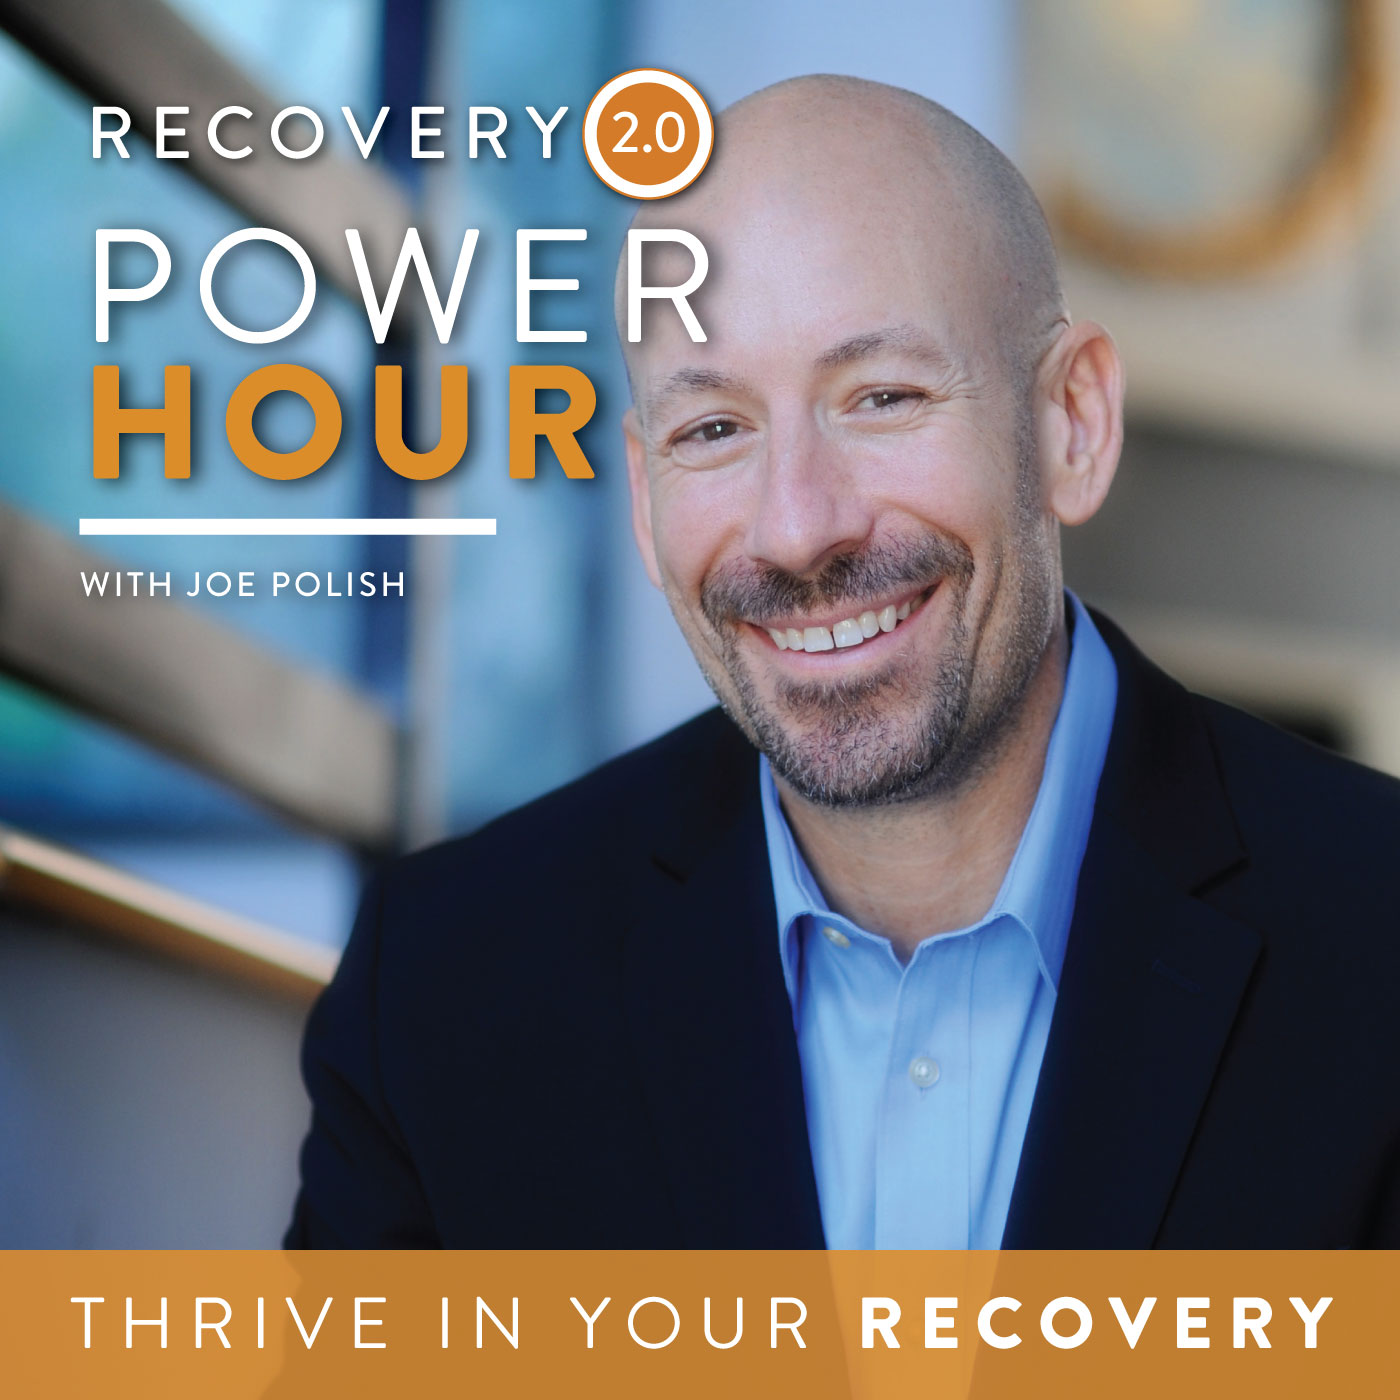 Joe Polish: A Comprehensive Look At Addiction and Recovery